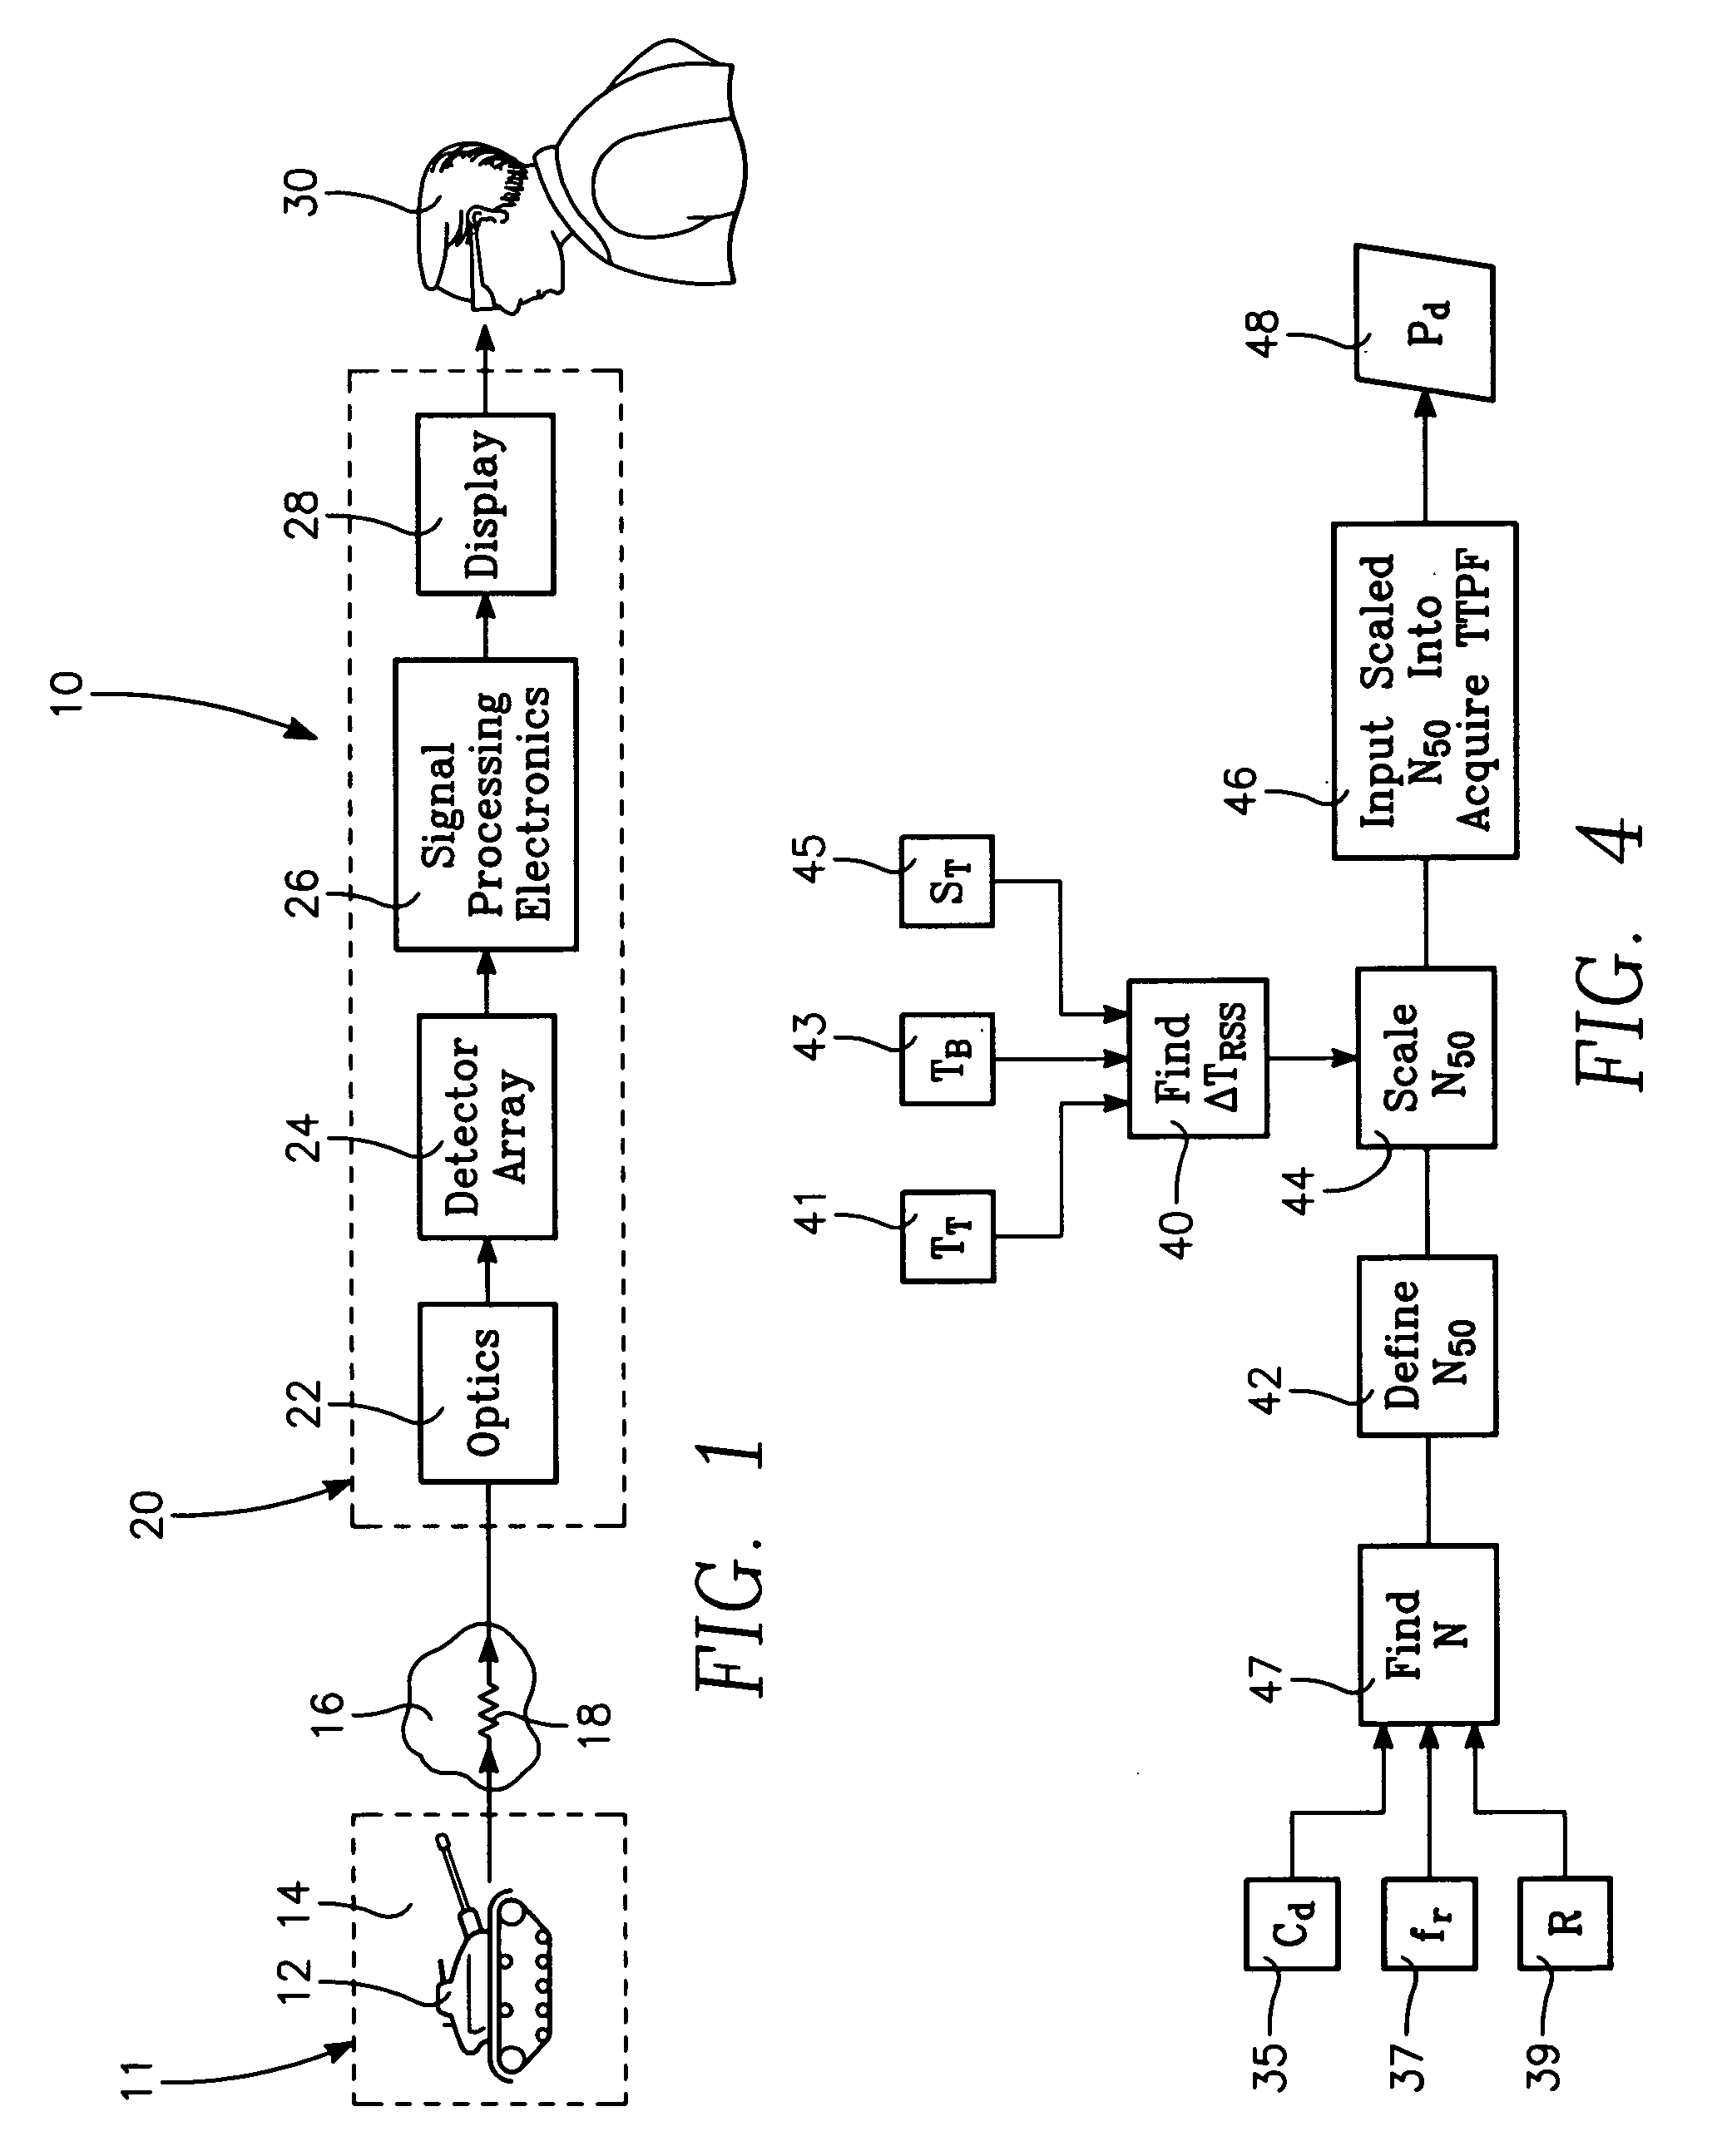 Method for modeling detection of camouflaged targets